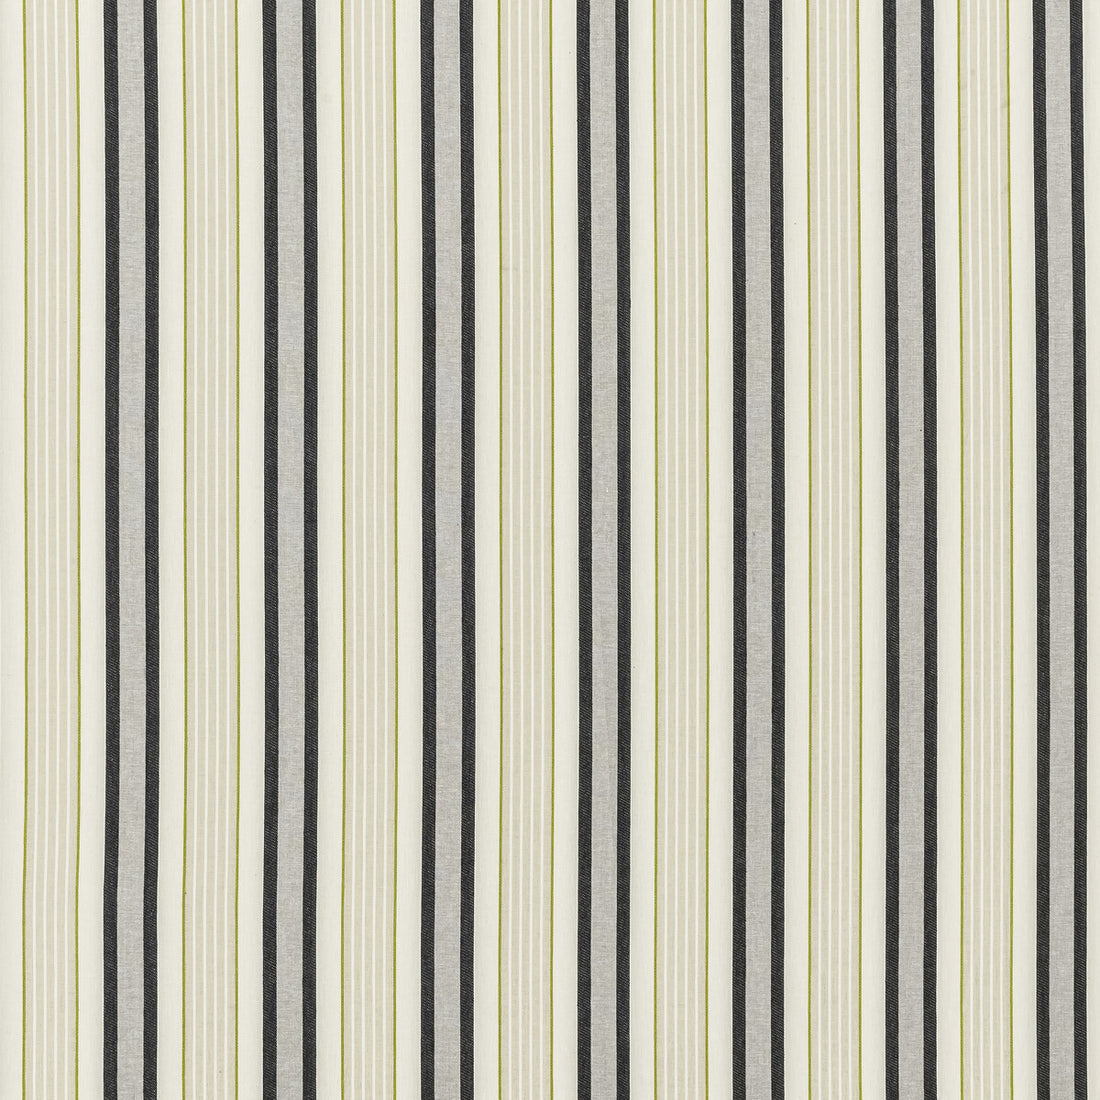 Belvoir fabric in charcoal/chartreu color - pattern F1430/02.CAC.0 - by Clarke And Clarke in the Clarke &amp; Clarke Botanist collection